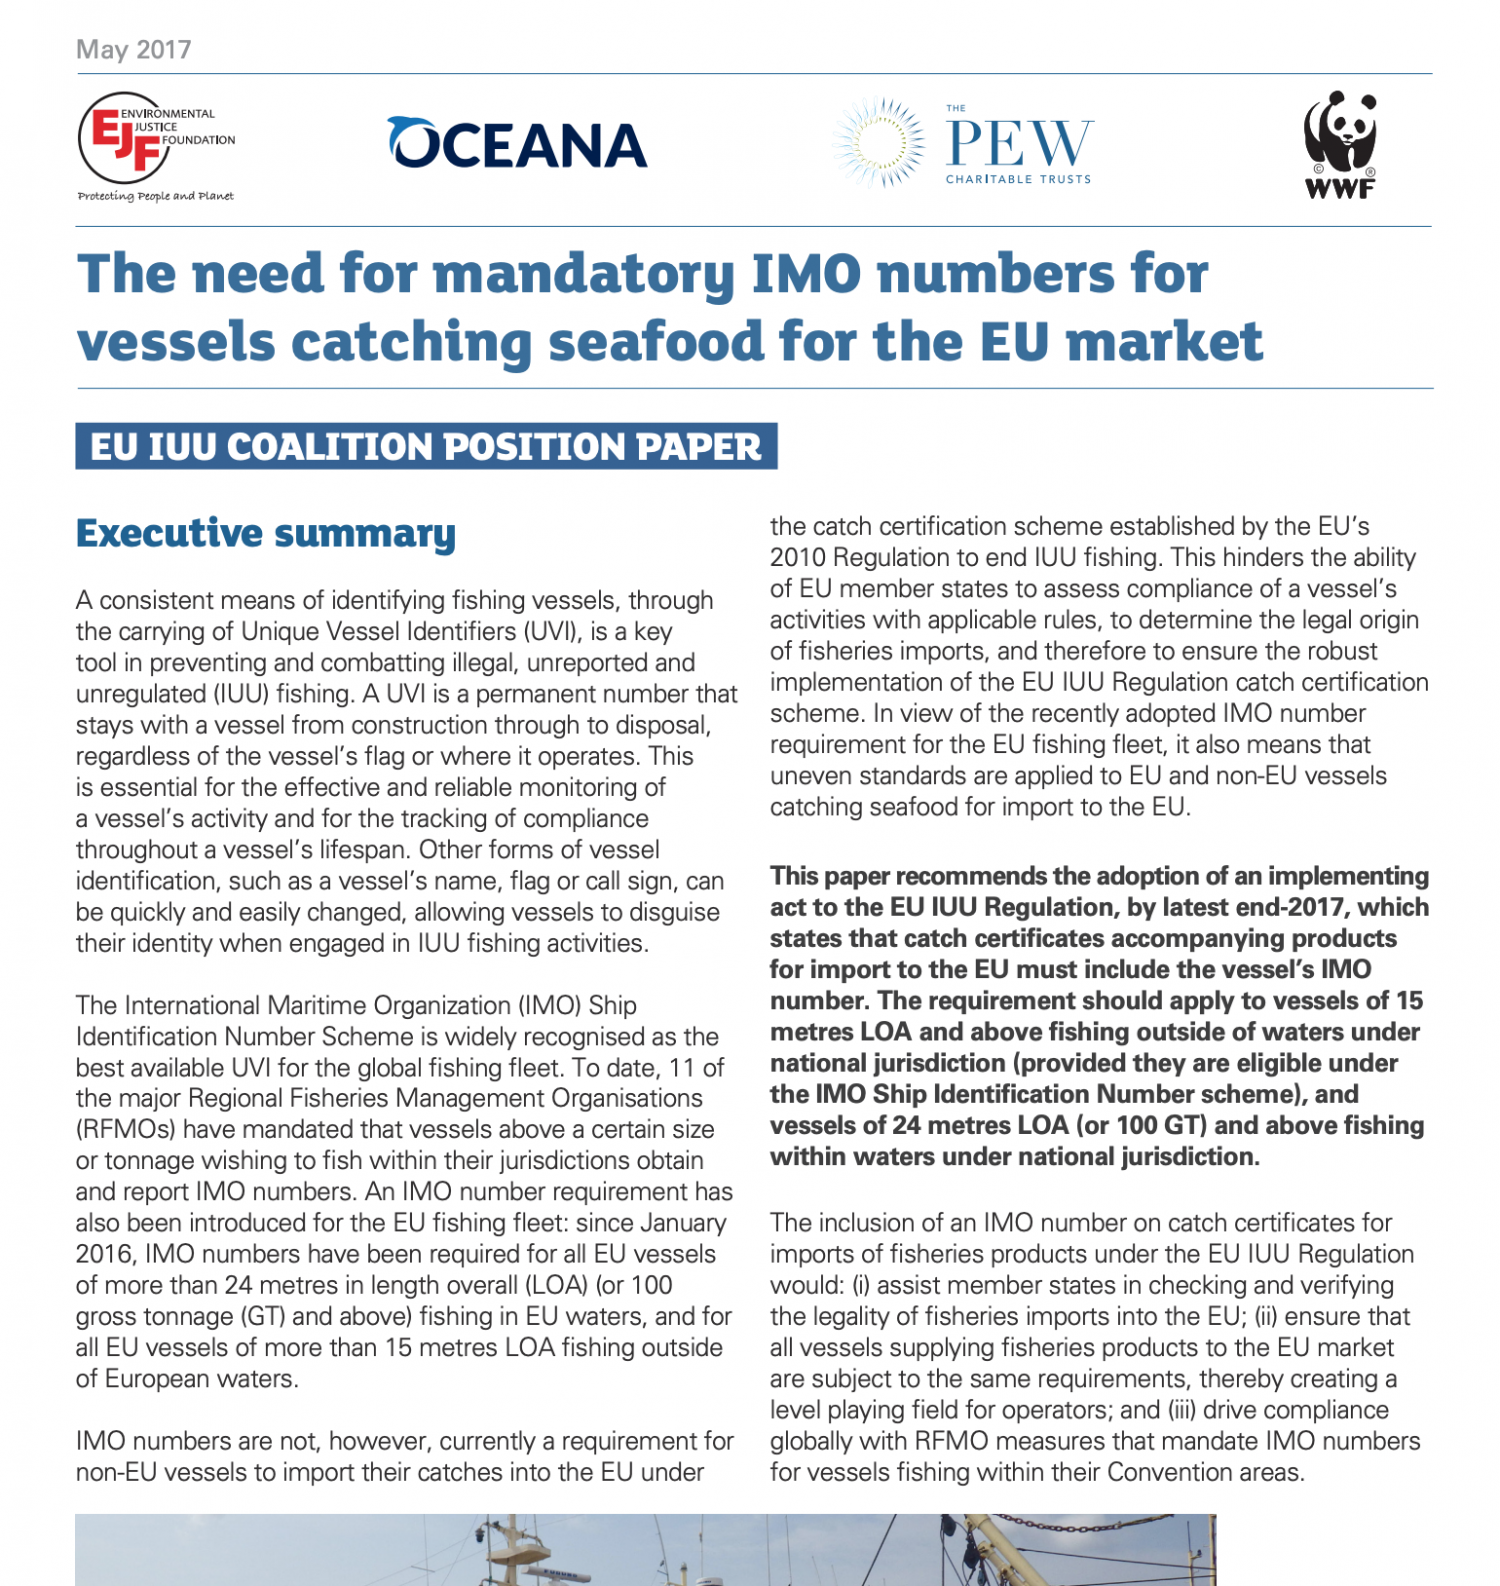 The need for mandatory IMO numbers for vessels catching seafood for the EU market